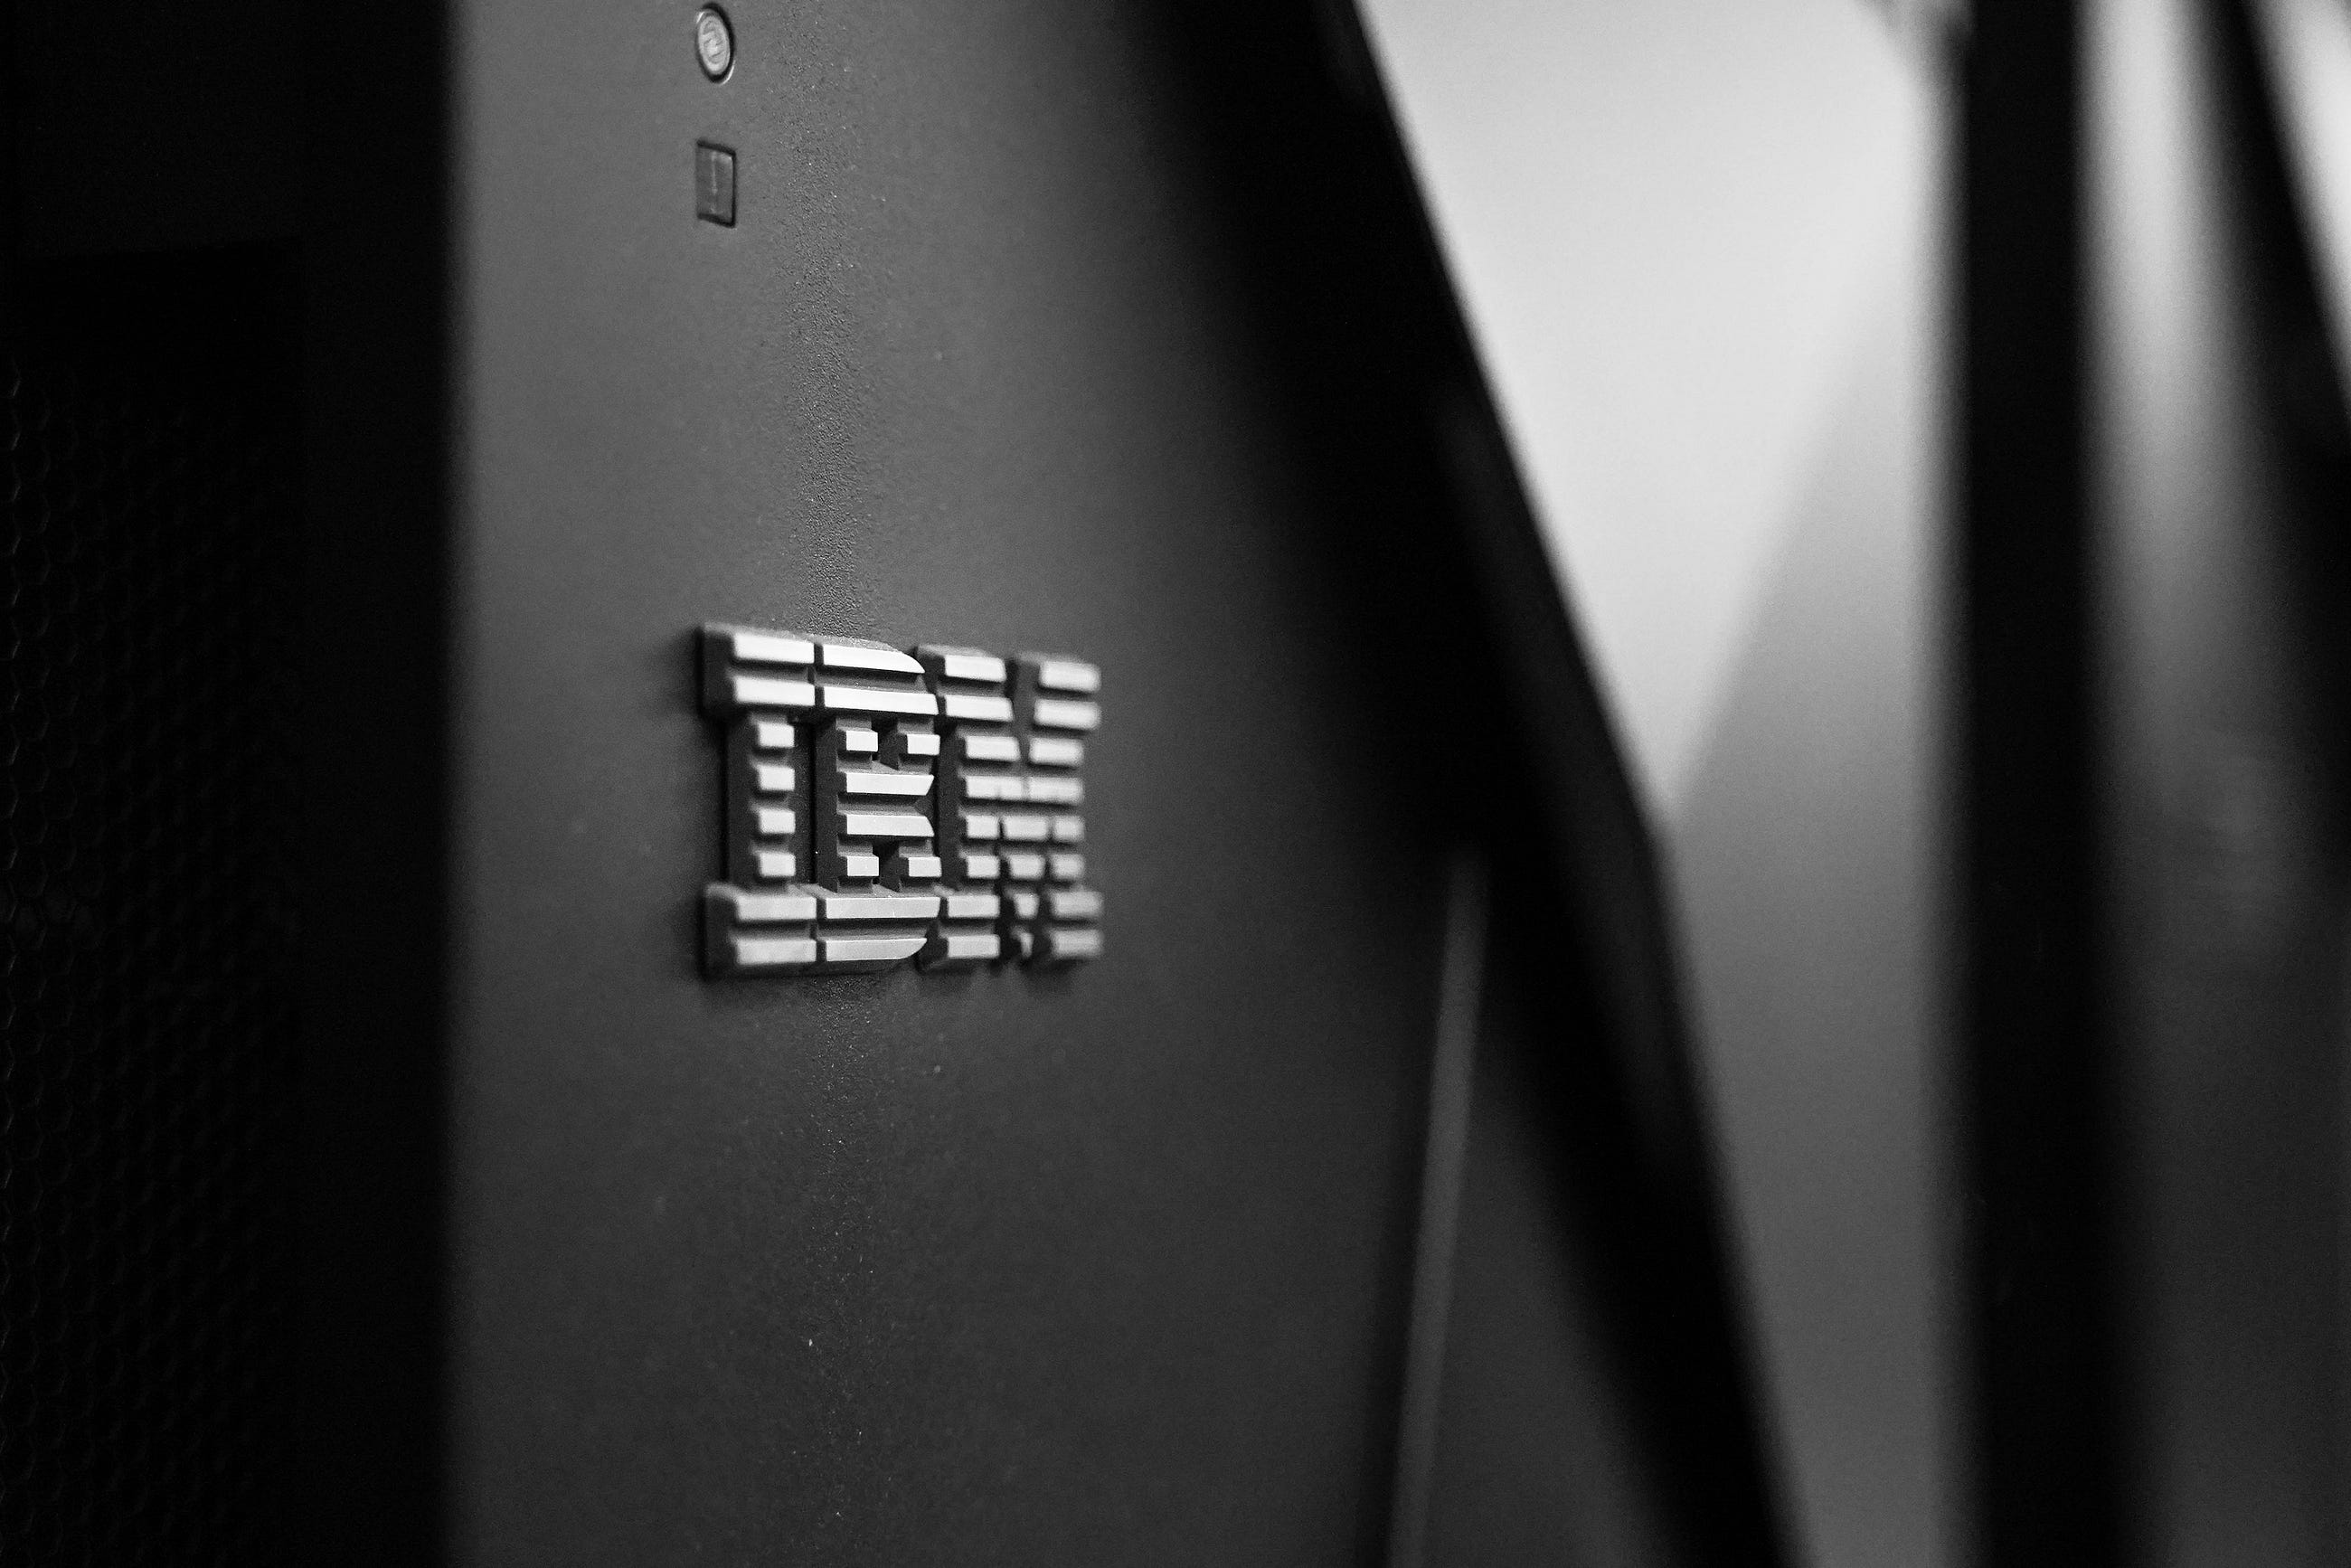 IBM is Giving Out $800 Worth of Data Science and AI Courses For Free